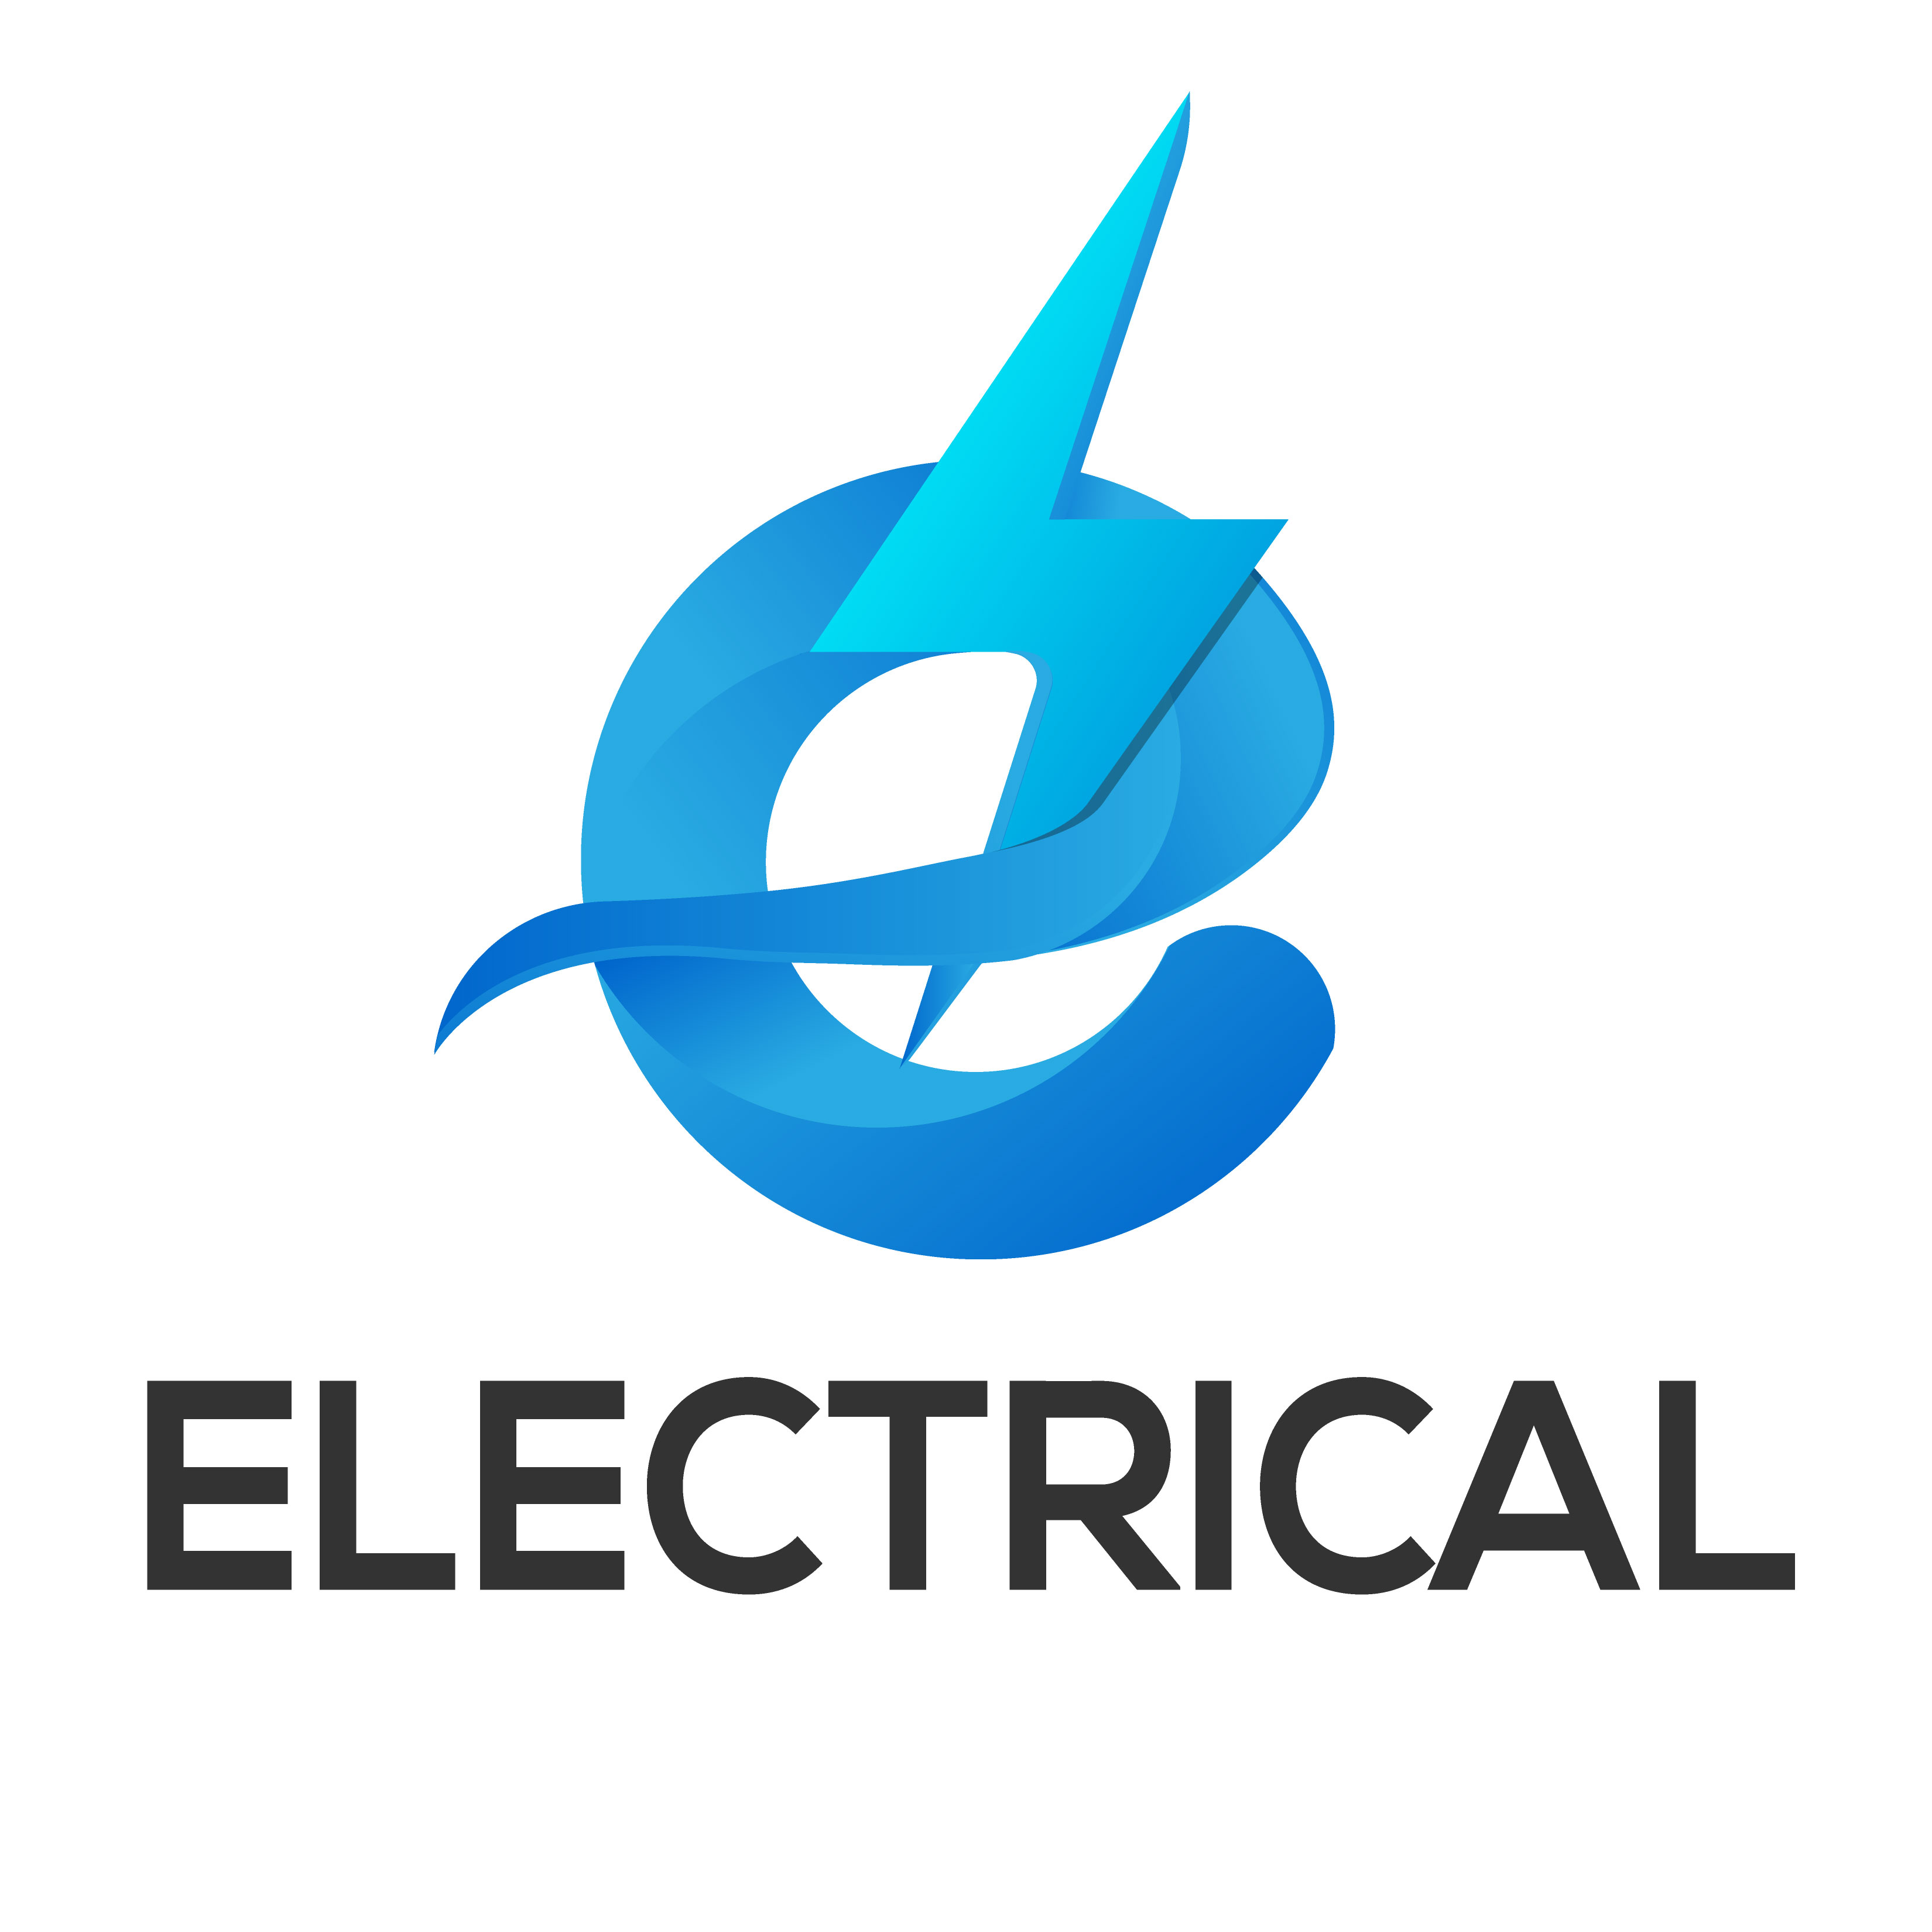 Logo for a electrical company.